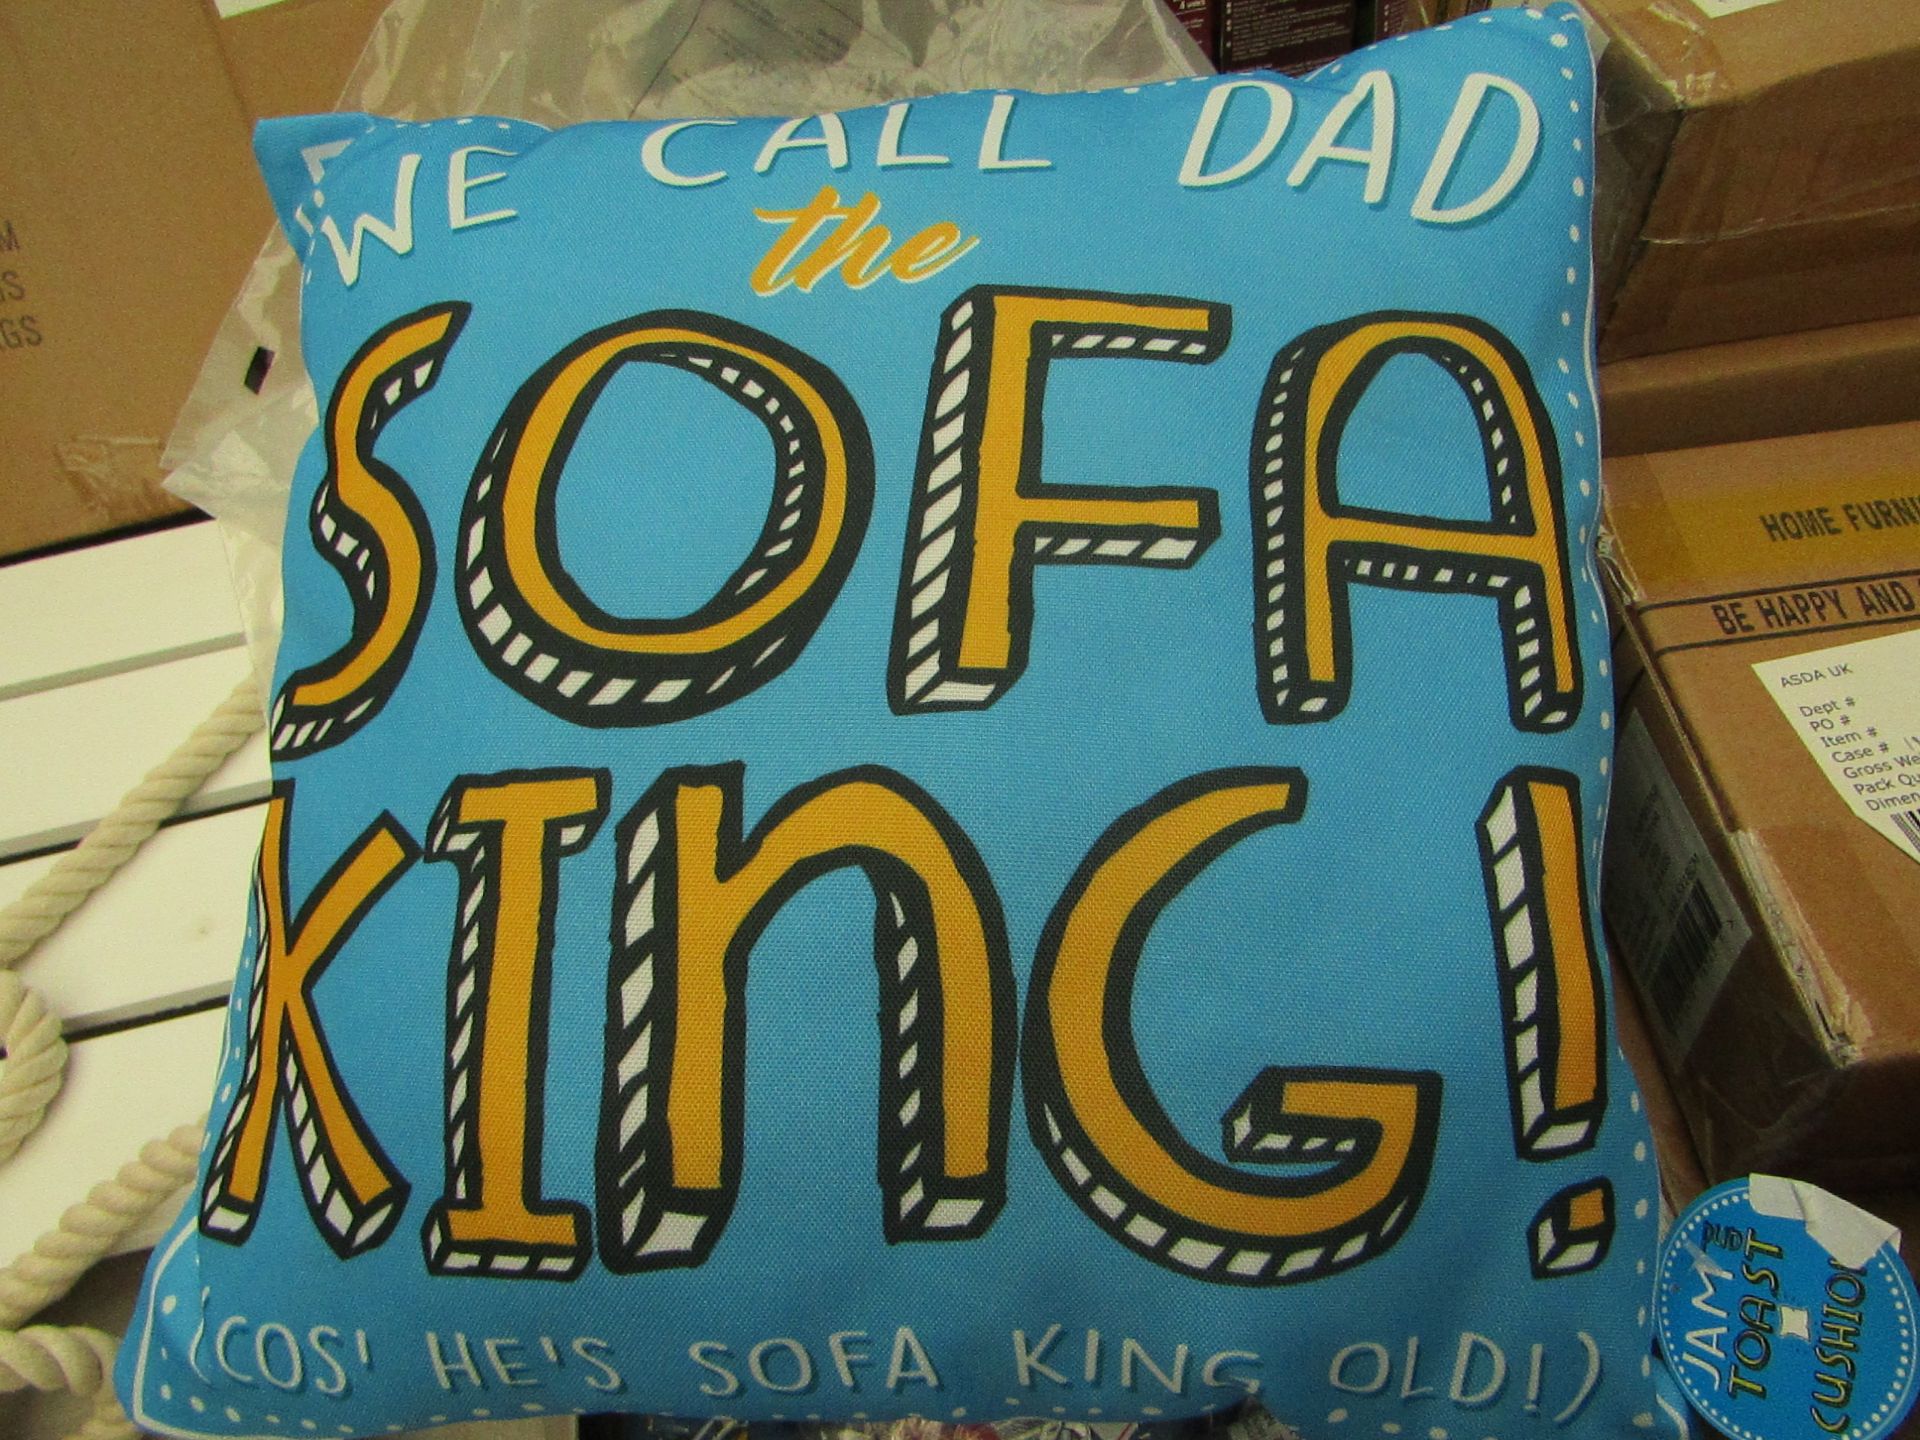 2x We Call Dad The Sofa King Cushions (40x40cm) - New with Tags & Packaged.